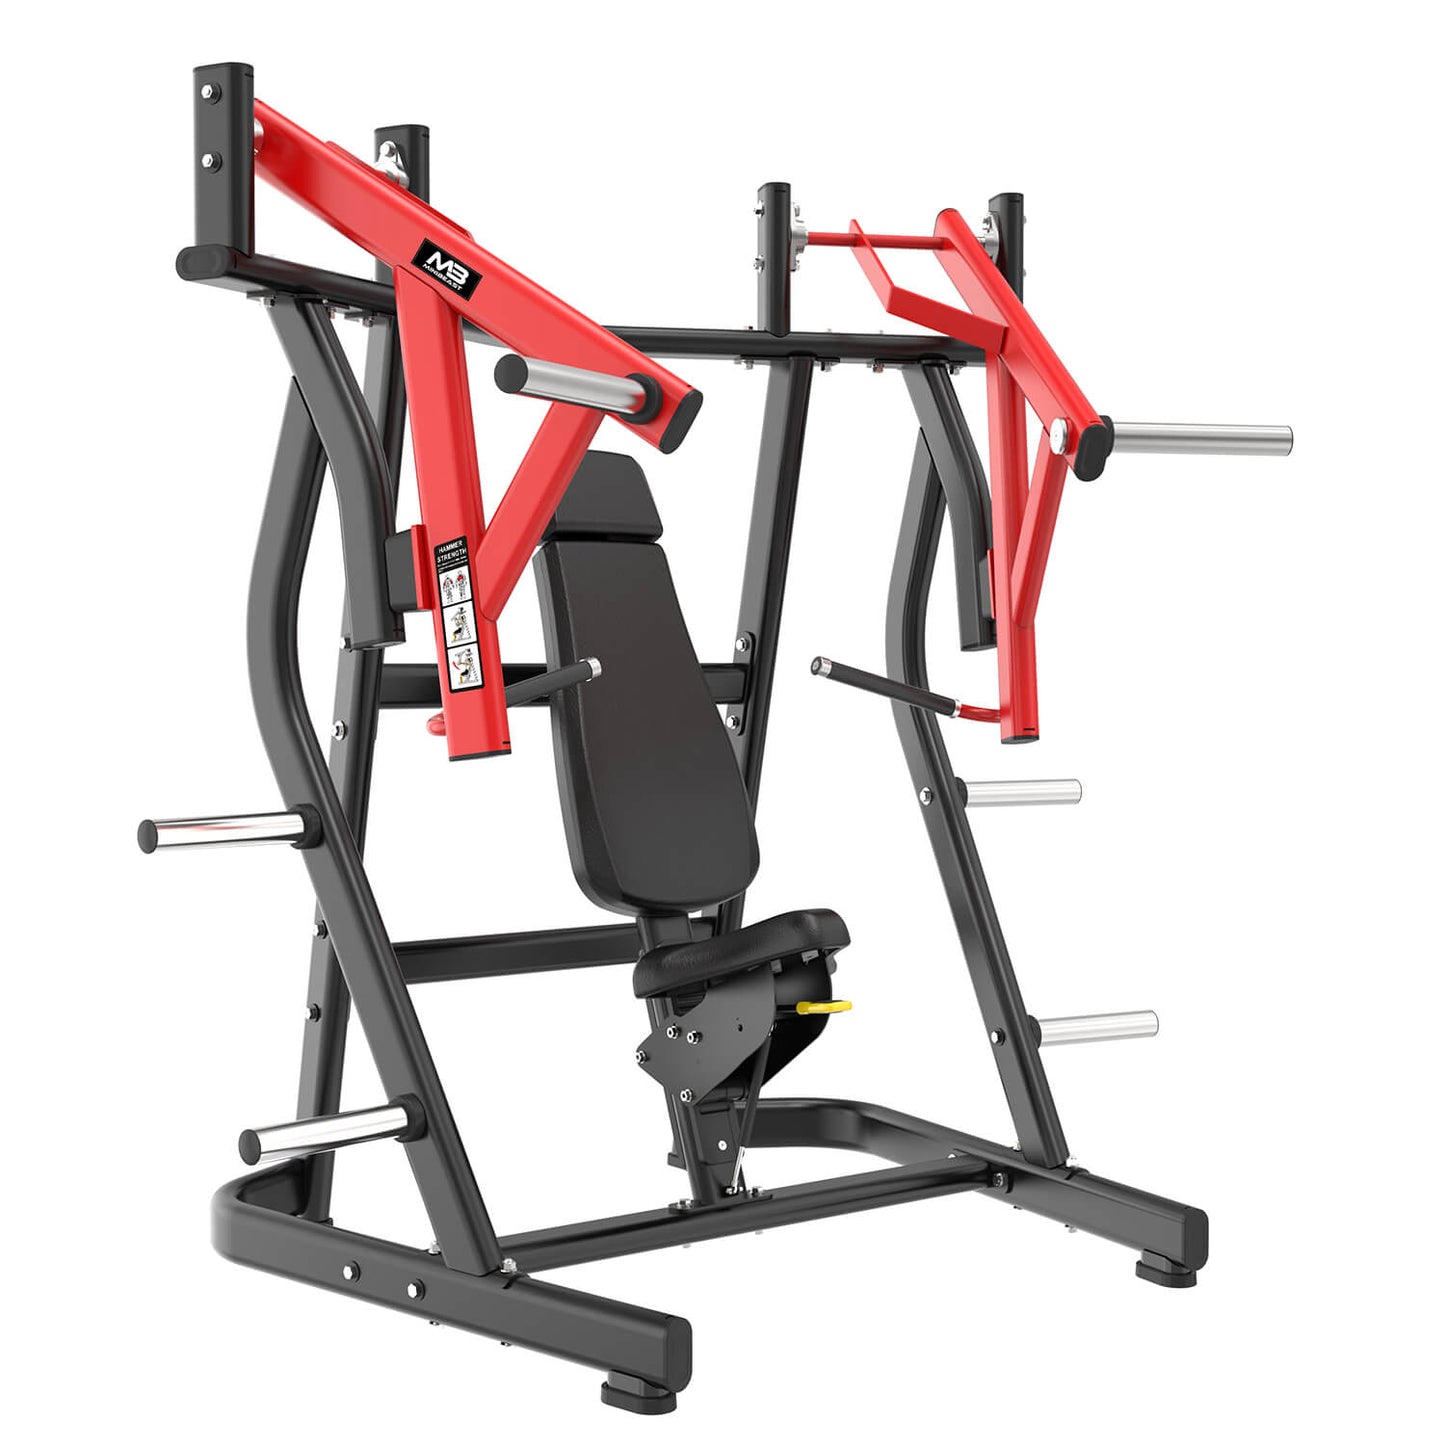 MBTN - Seated chest press